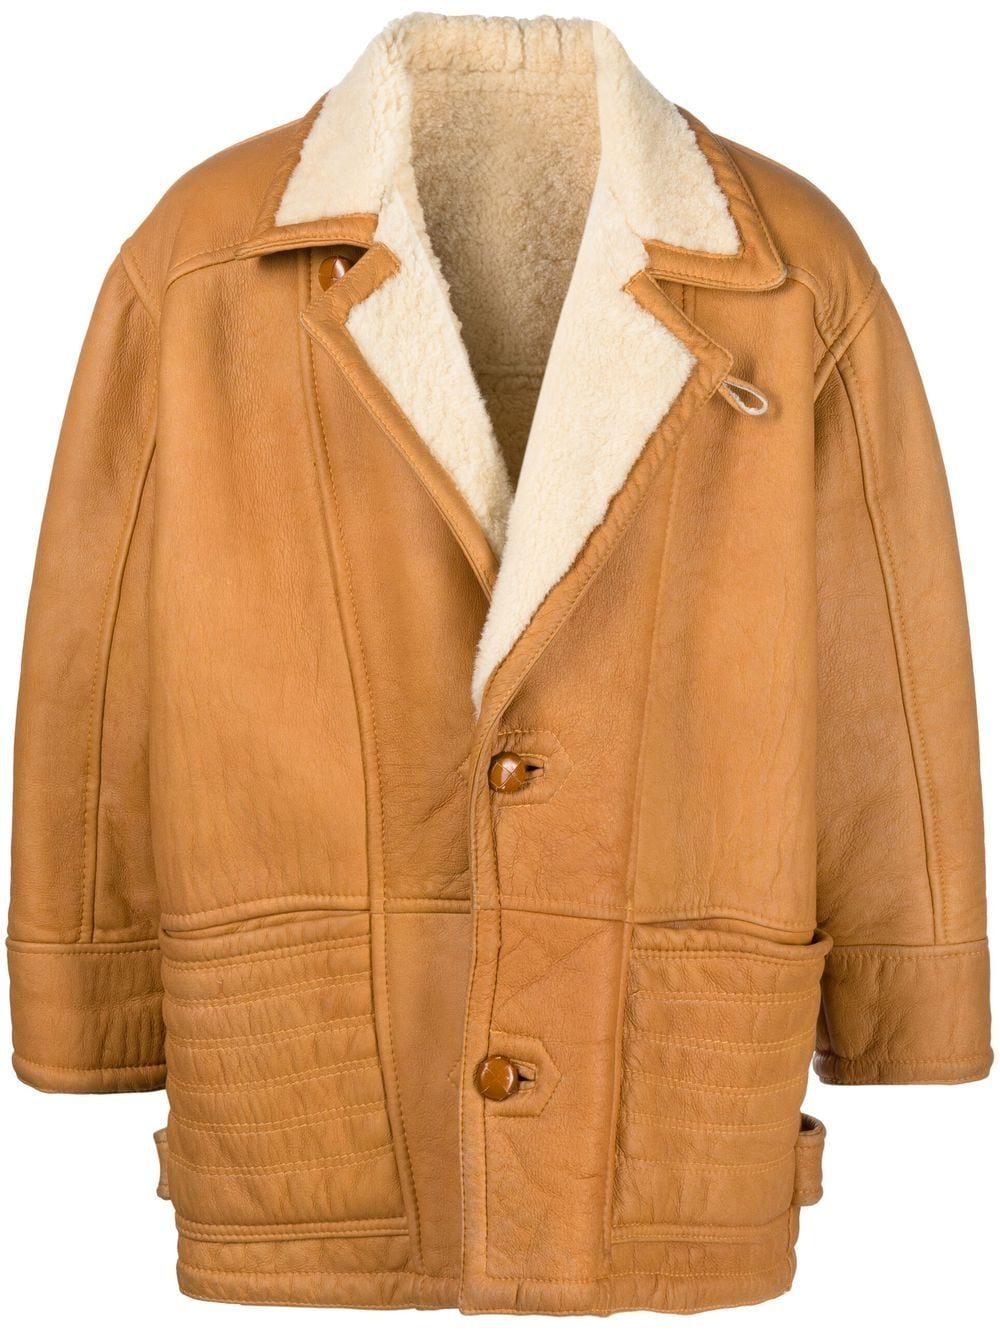 1980s shearling-lined leather coat